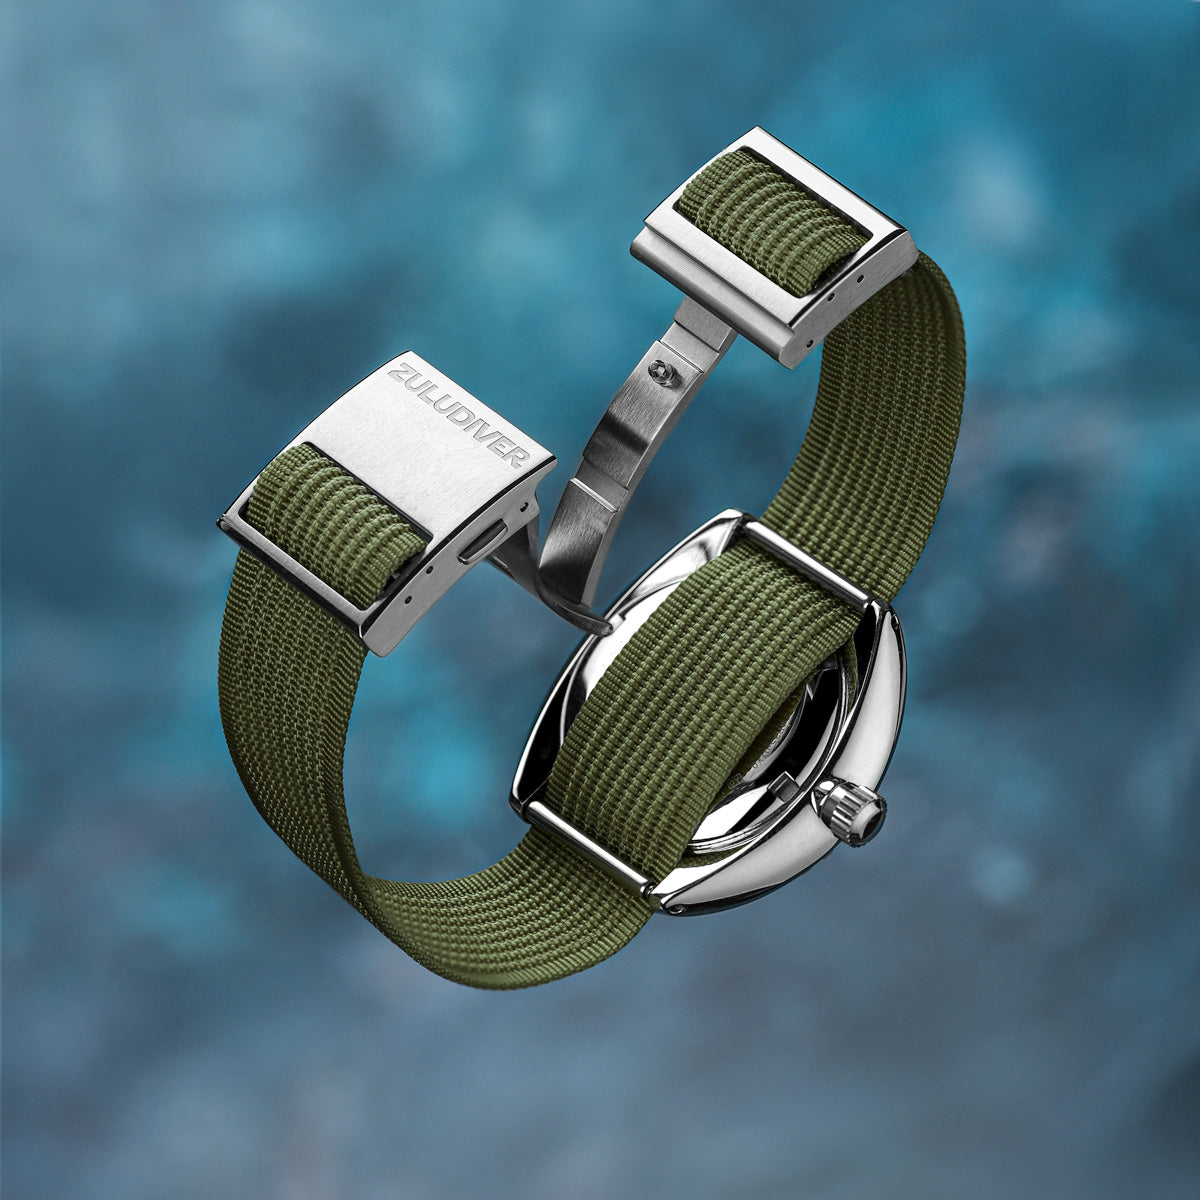 ADDITIONAL - HydraRib OctoPod Watch Straps - Ares - additional image 2